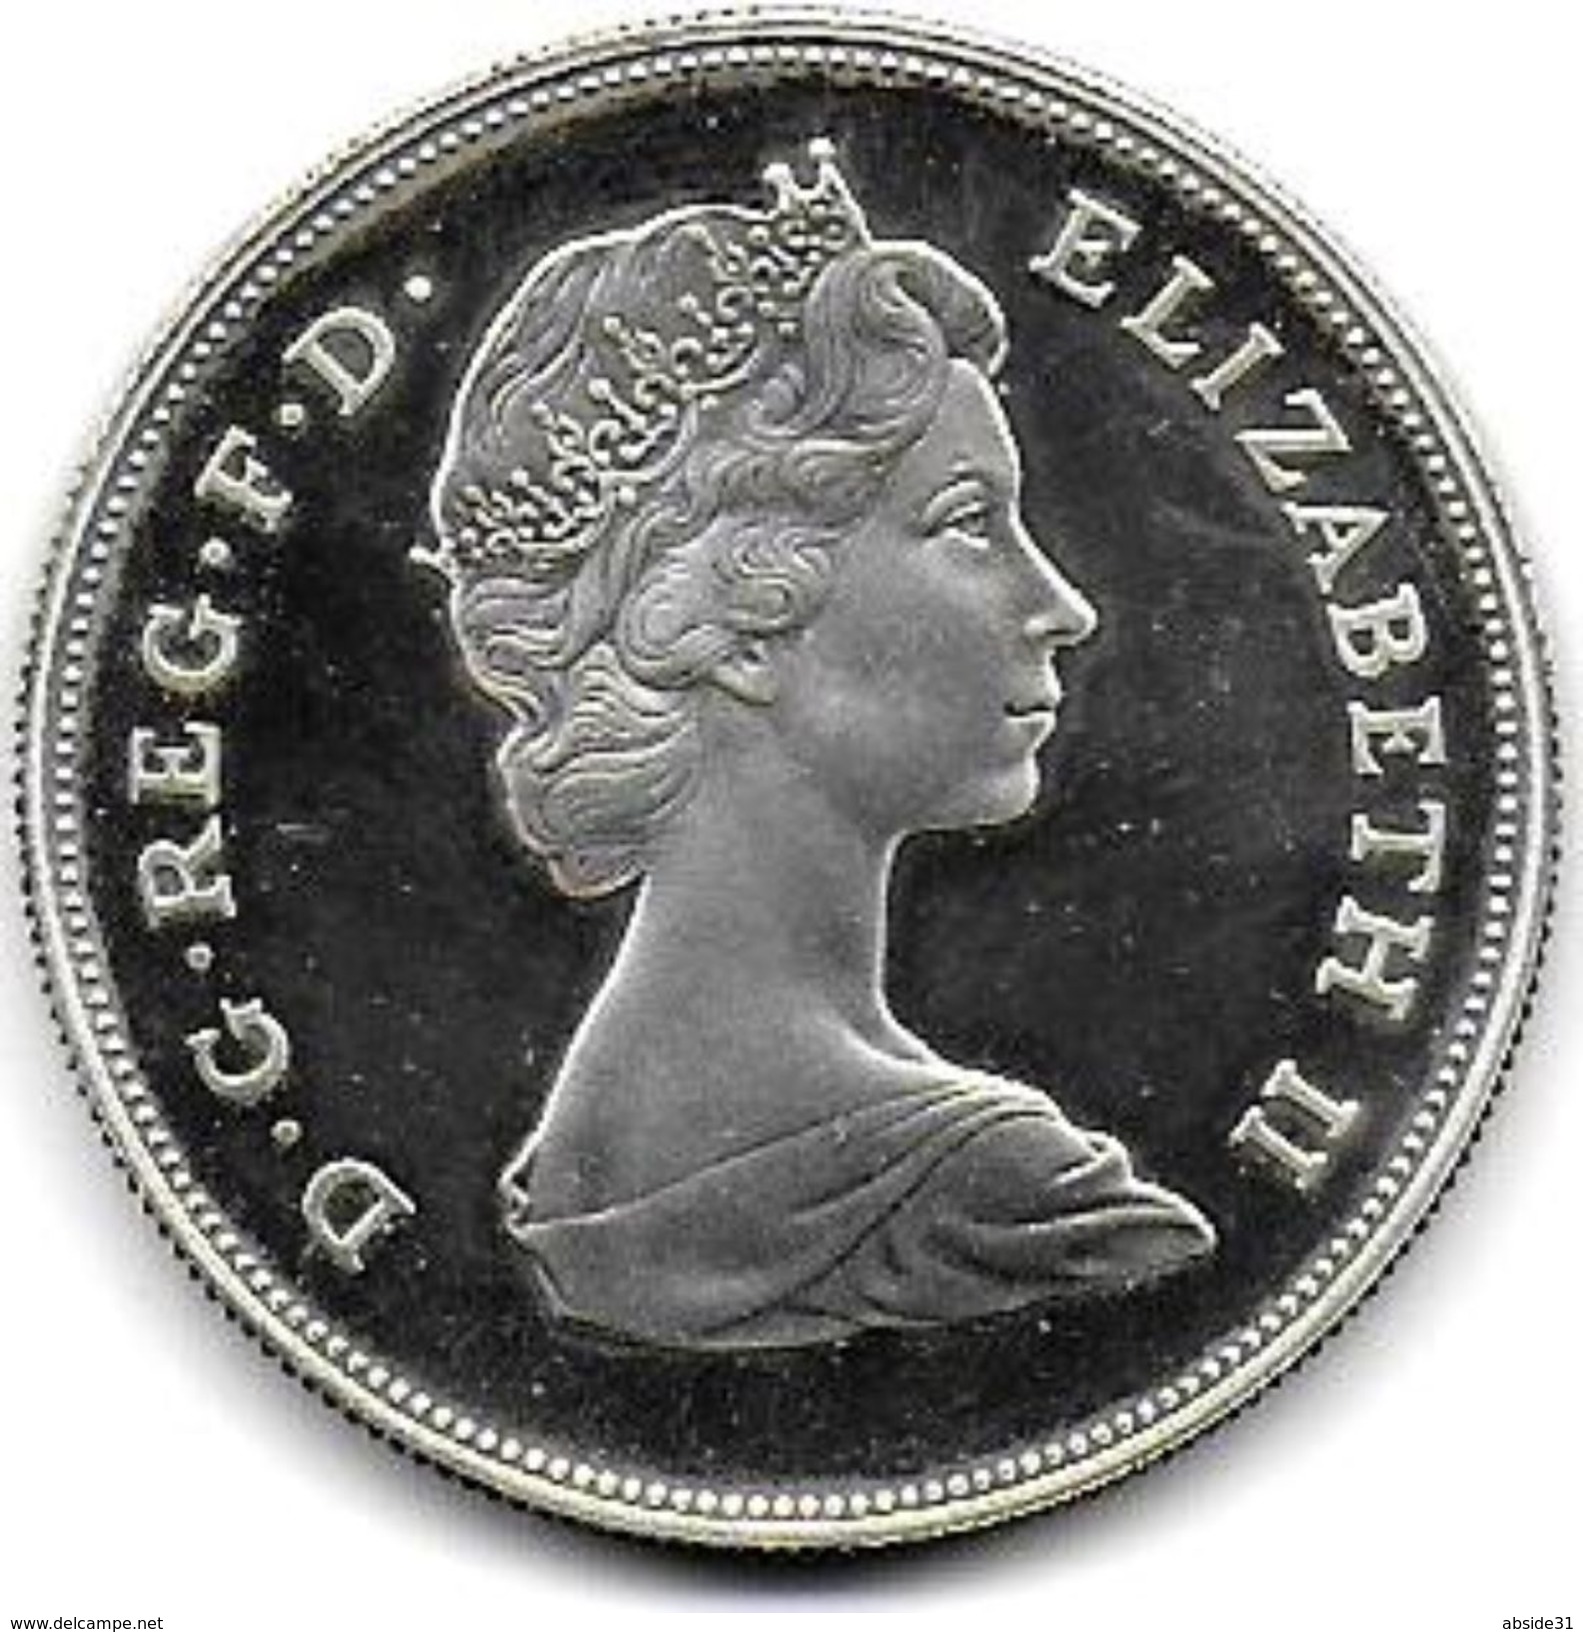 H.R.H. The Prince Of Wales And Lady Diana Spencer ( Proof Silver ) - Maundy Sets & Commemorative